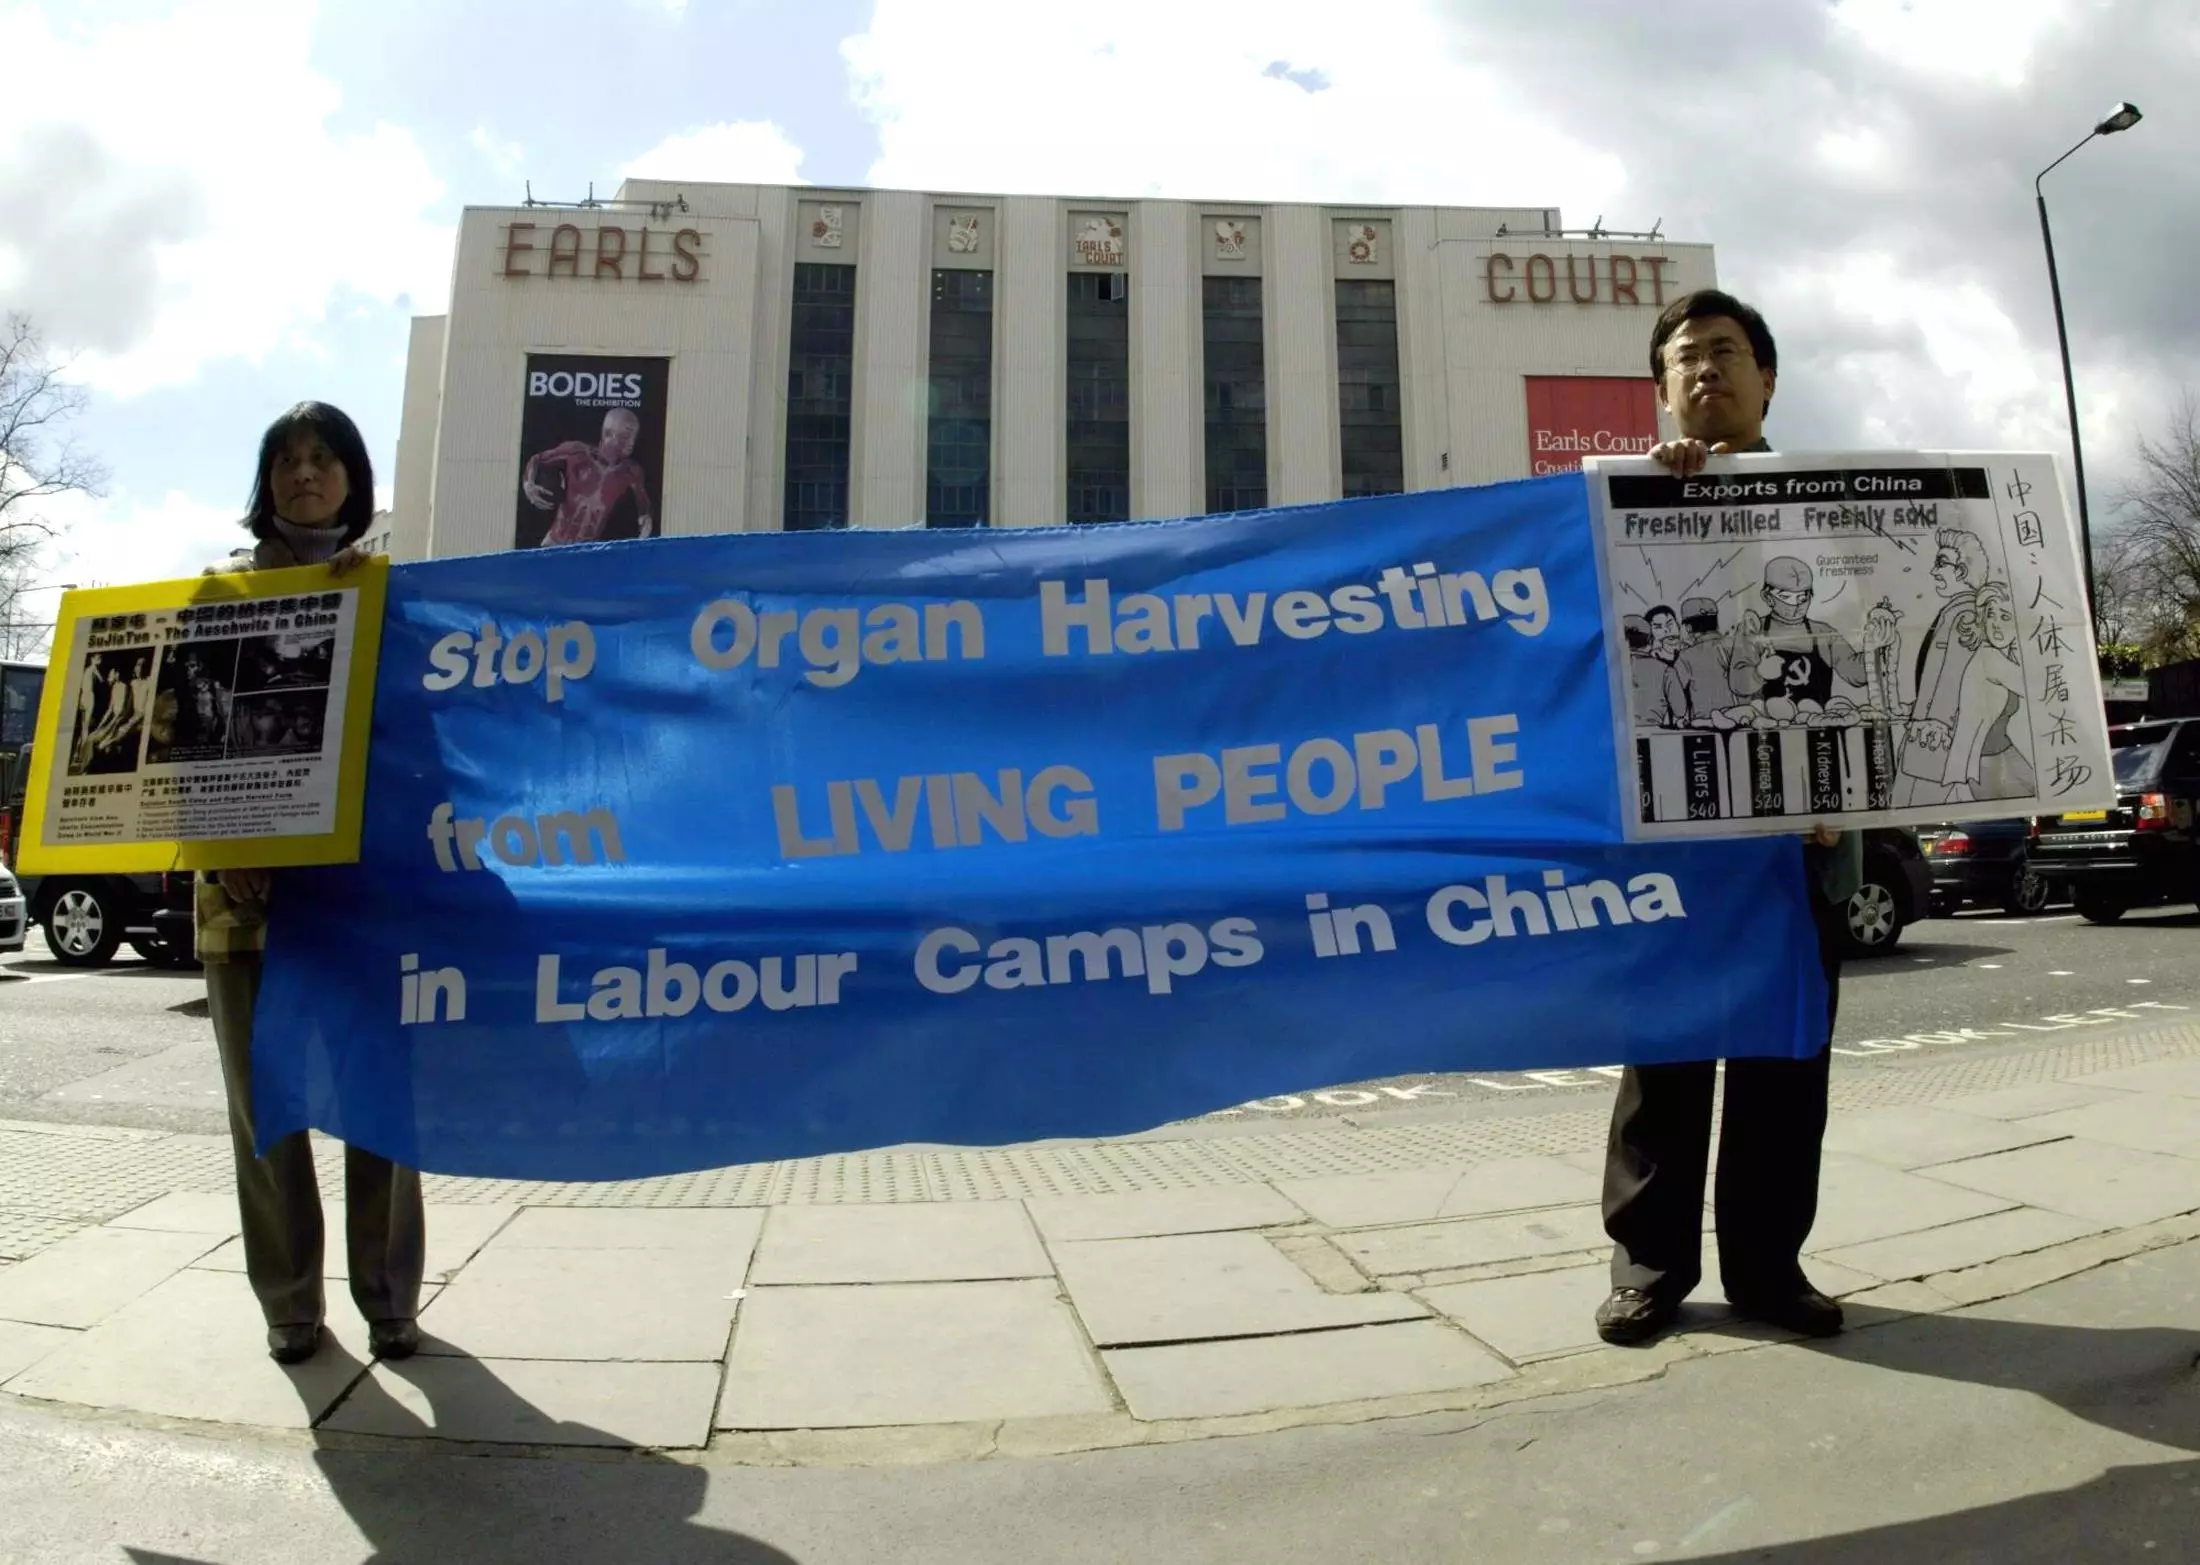 The tribunal found that the Chinese government has been extracting organs from living members of the Falun Gong spiritual group for at least 20 years.